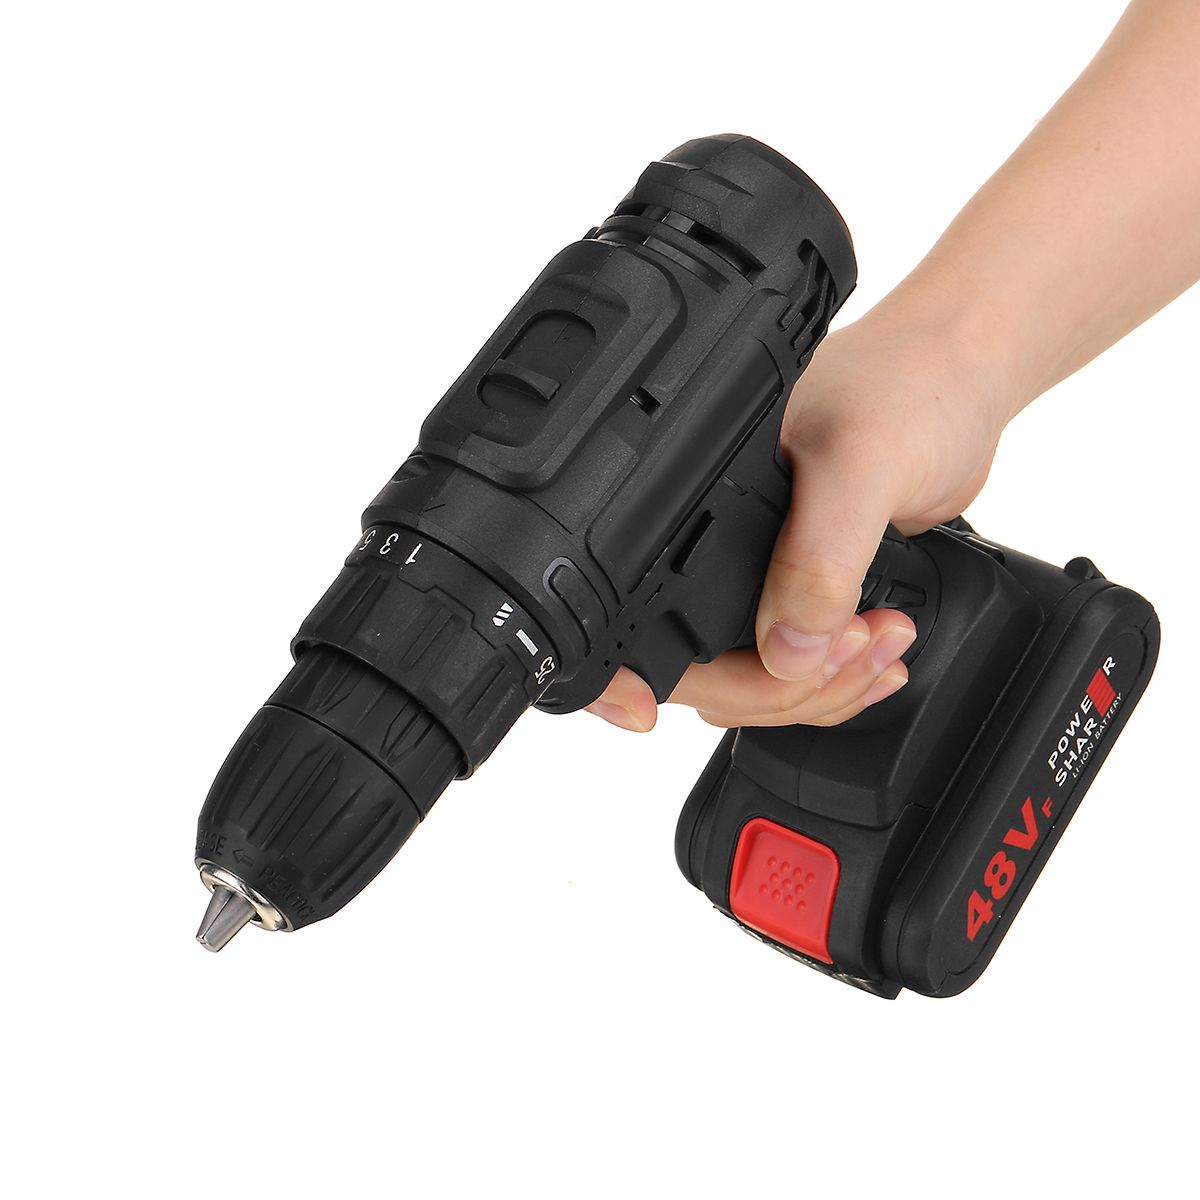 Cordless-Impact-Wrench-Drill-Socket-25-Speeds-LED-Electric-Screwdrive-w-12-Batteries-1712153